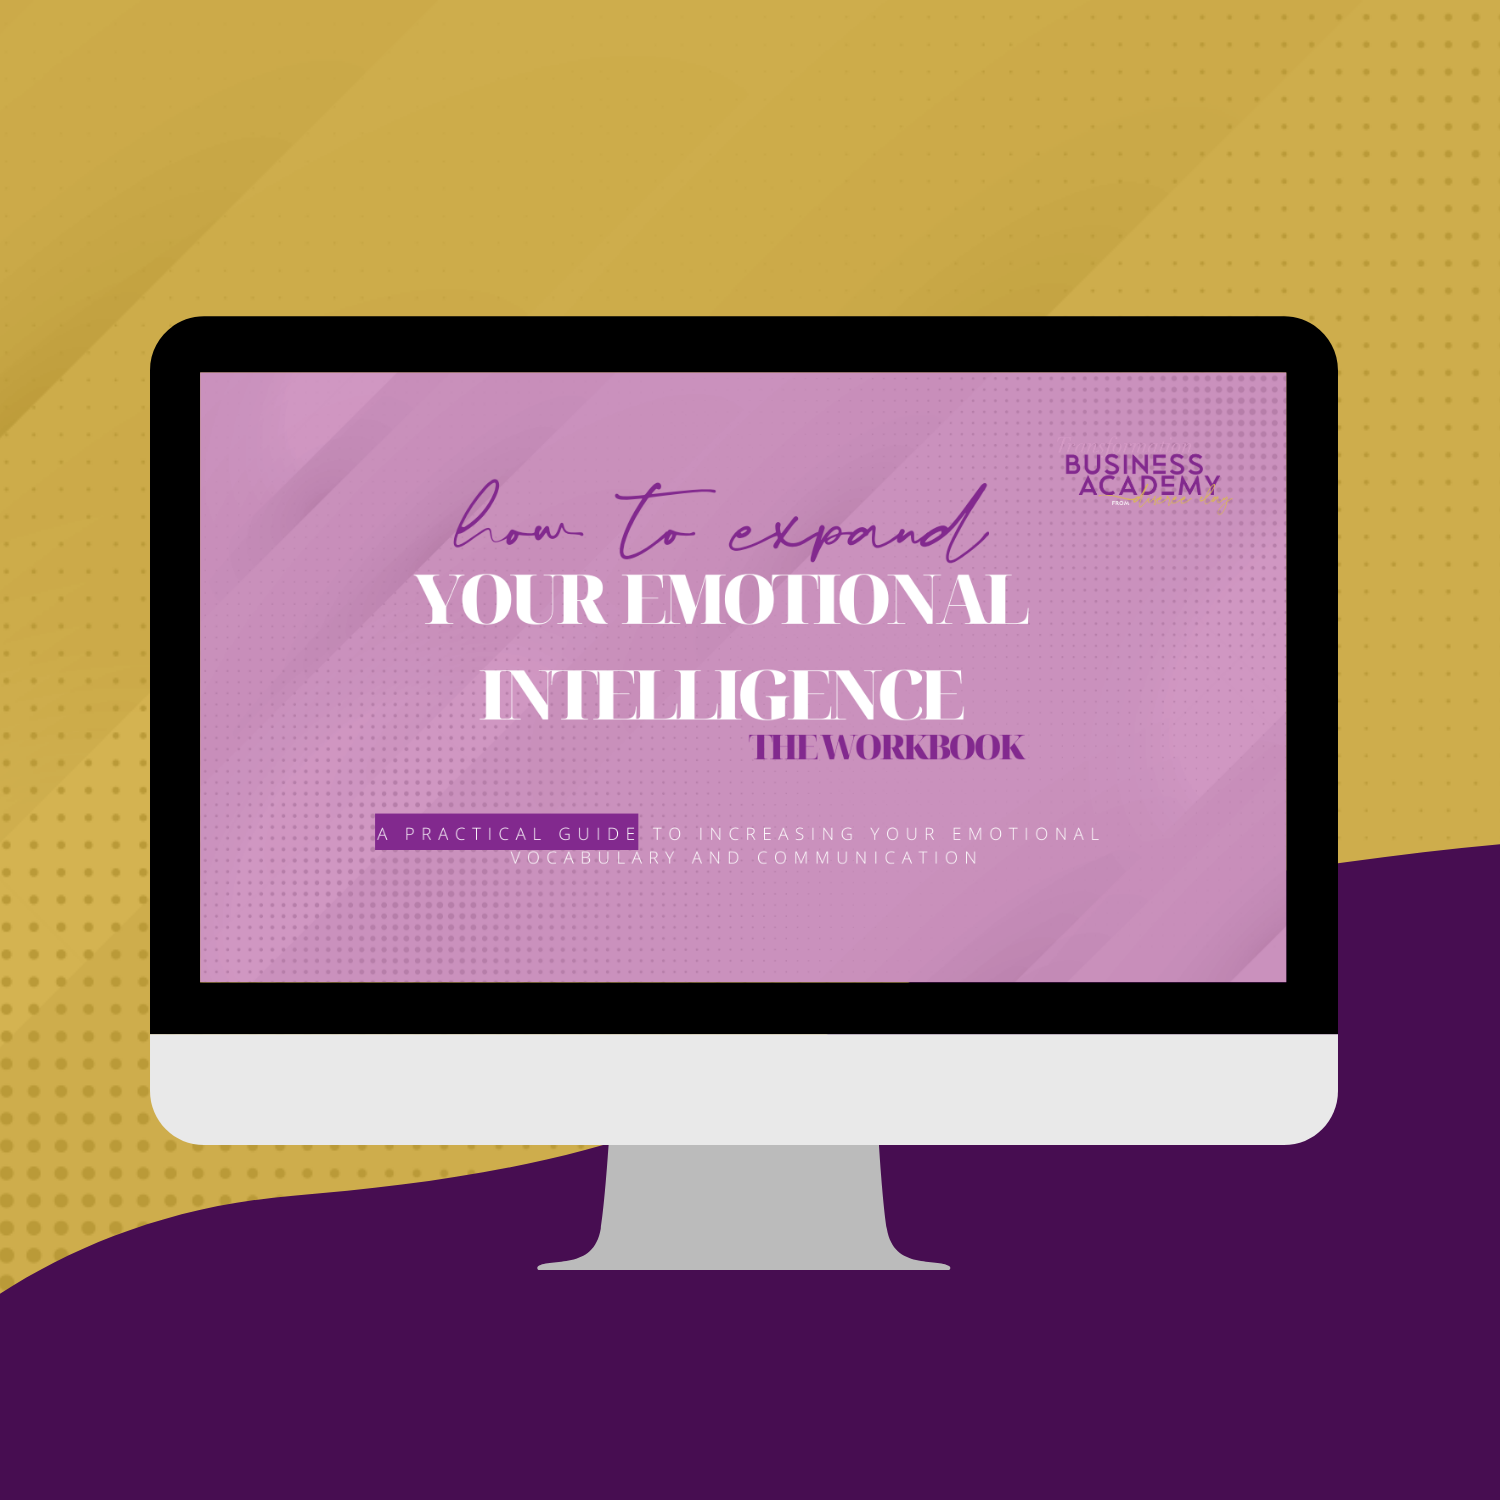 How to Expand Your Emotional Intelligence Workbook